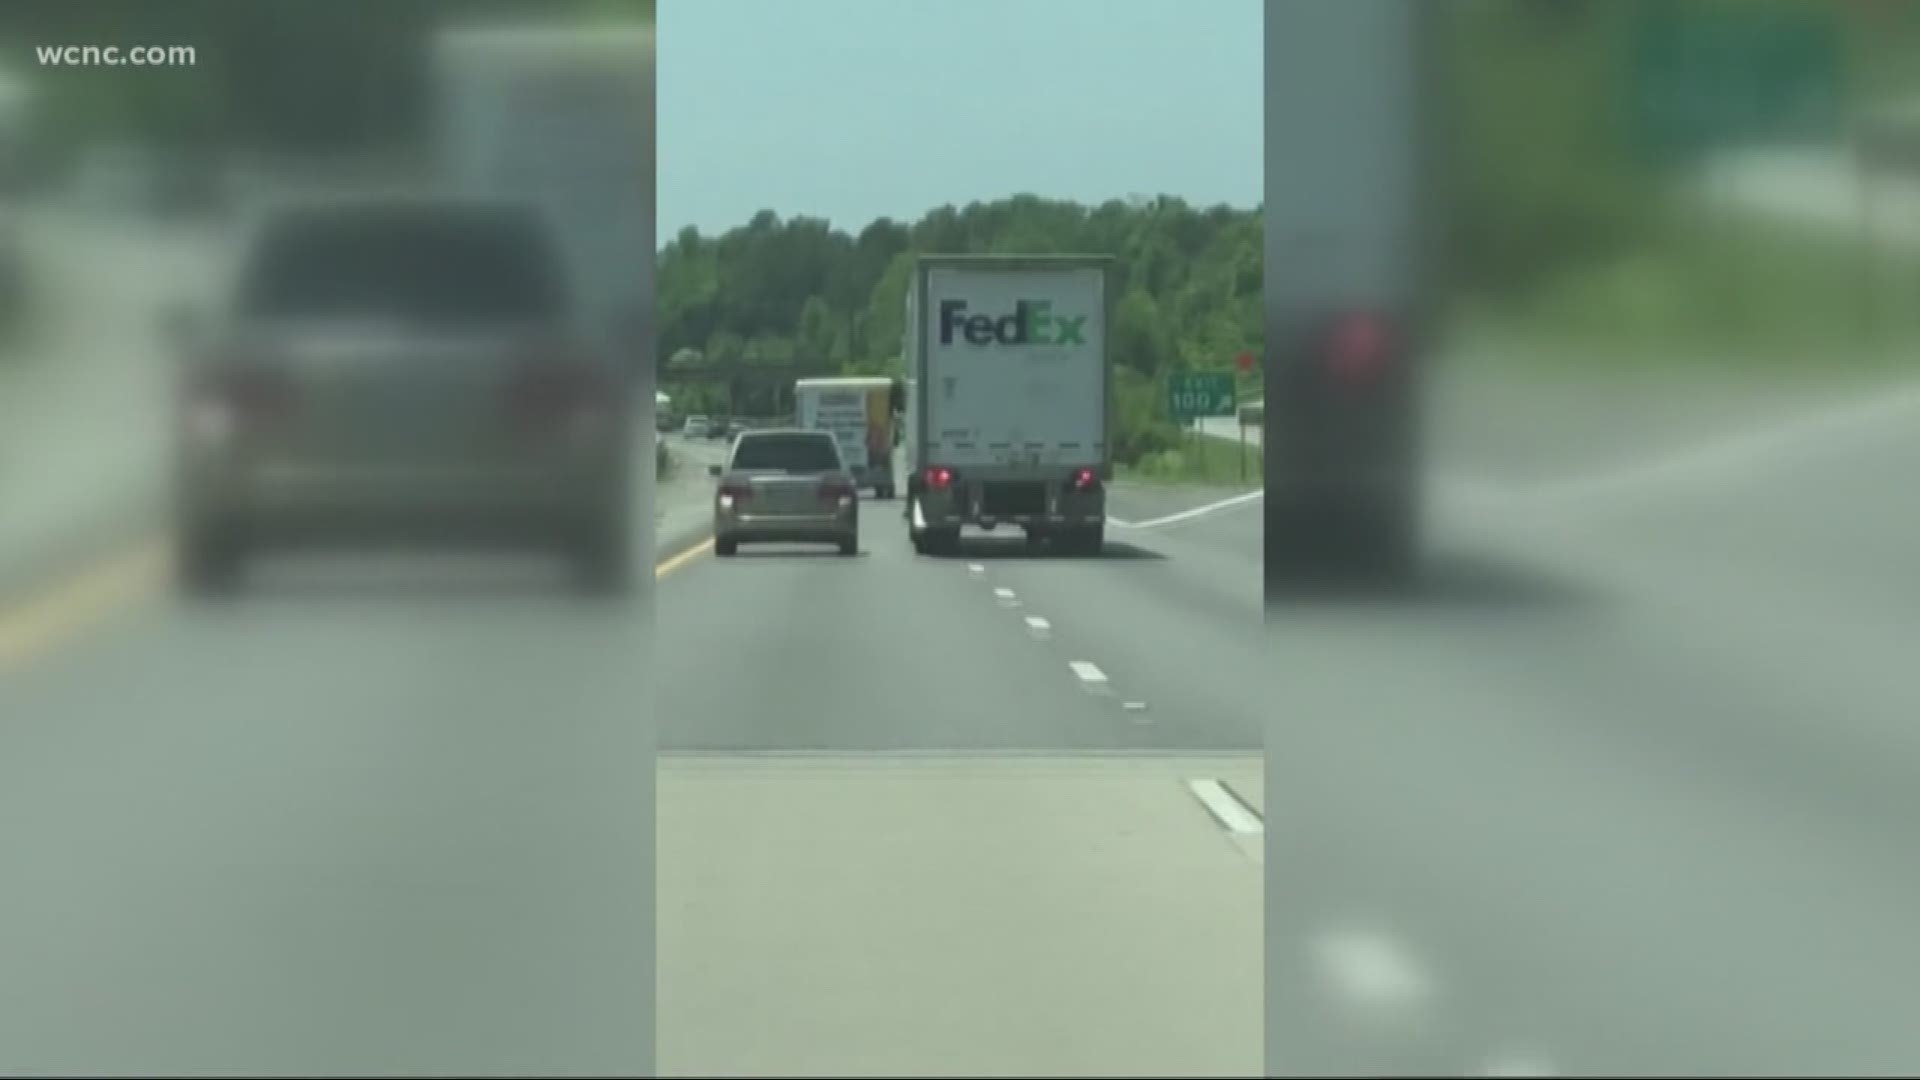 Shocking video appears to show a Fed-Ex truck running a minivan off the road in what appears to be road rage.